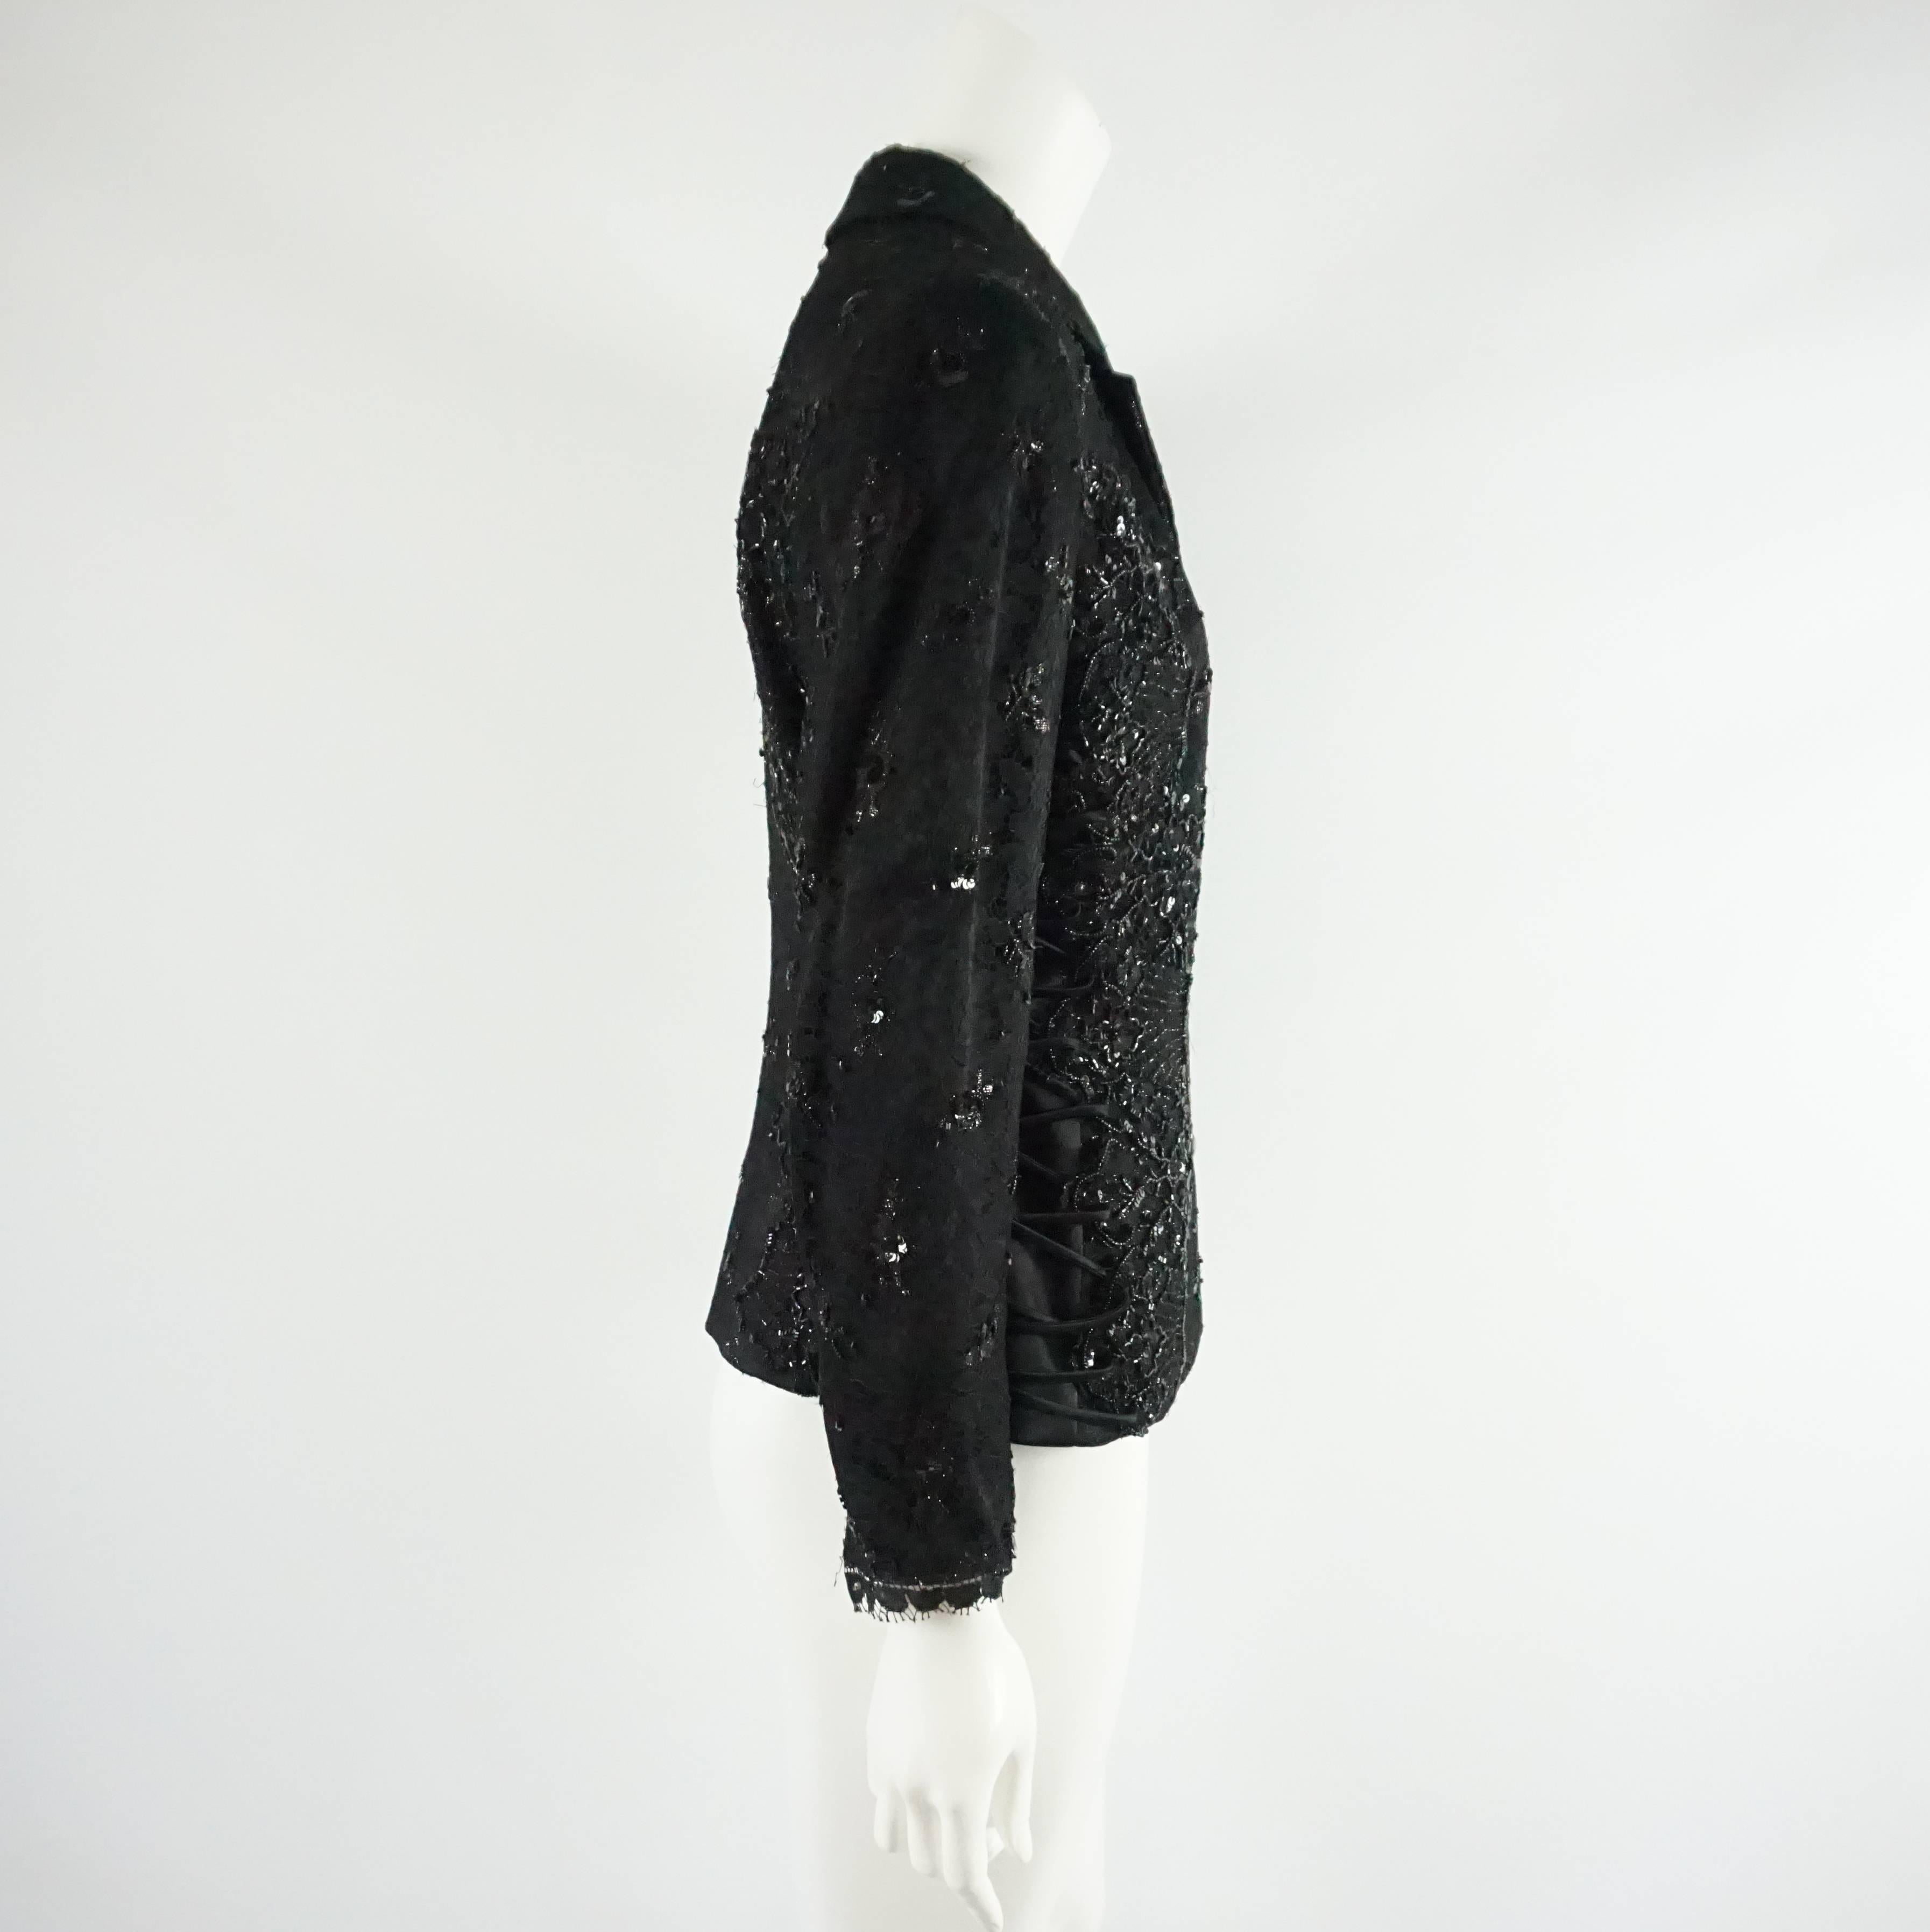 This Badgley Mischka black jacket is covered in lace and rhinestones. There is fabric that climbs up both sides and rhinestone-like buttons. This jacket is in excellent condition.

Measurements
Shoulder to Shoulder:
Sleeve